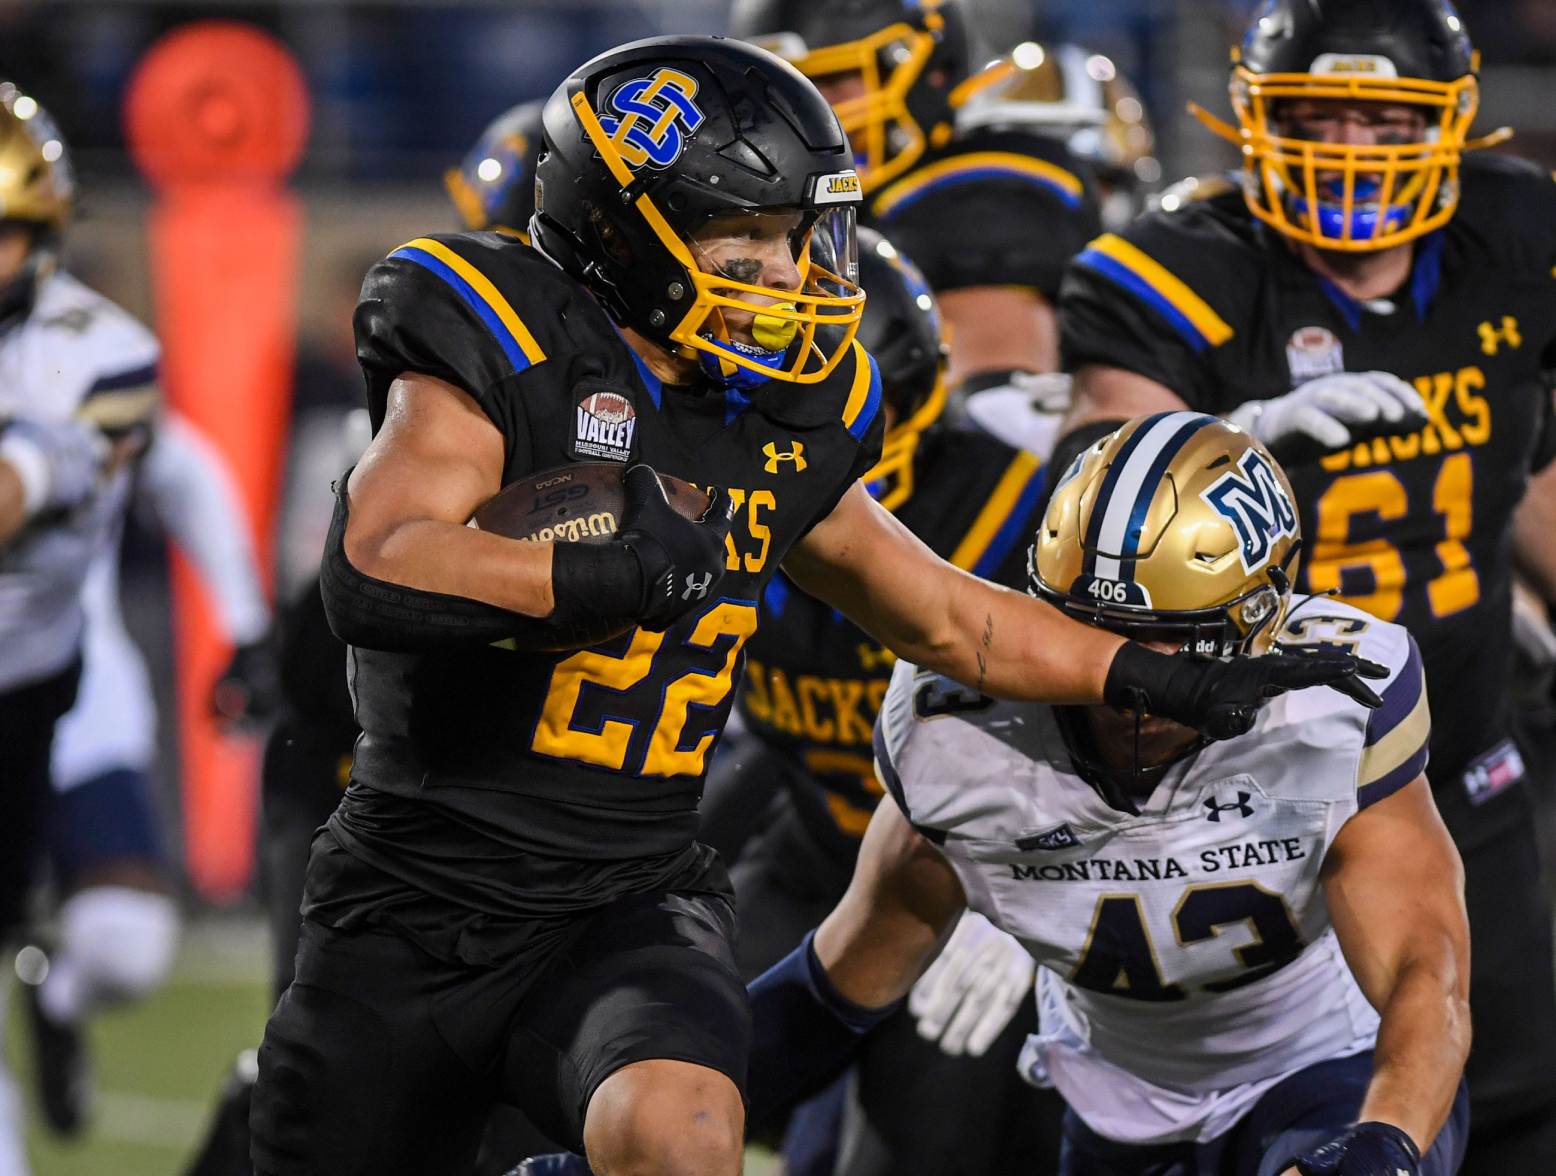 SDSU's Isaiah Davis (22) tries to defend ball while playing against the Montana State Bobcats at Dana J. Dykhouse Stadium in Brookings, South Dakota on Saturday, Sept. 9, 2023. (Samantha Laurey/Argus Leader/USA TODAY Network)